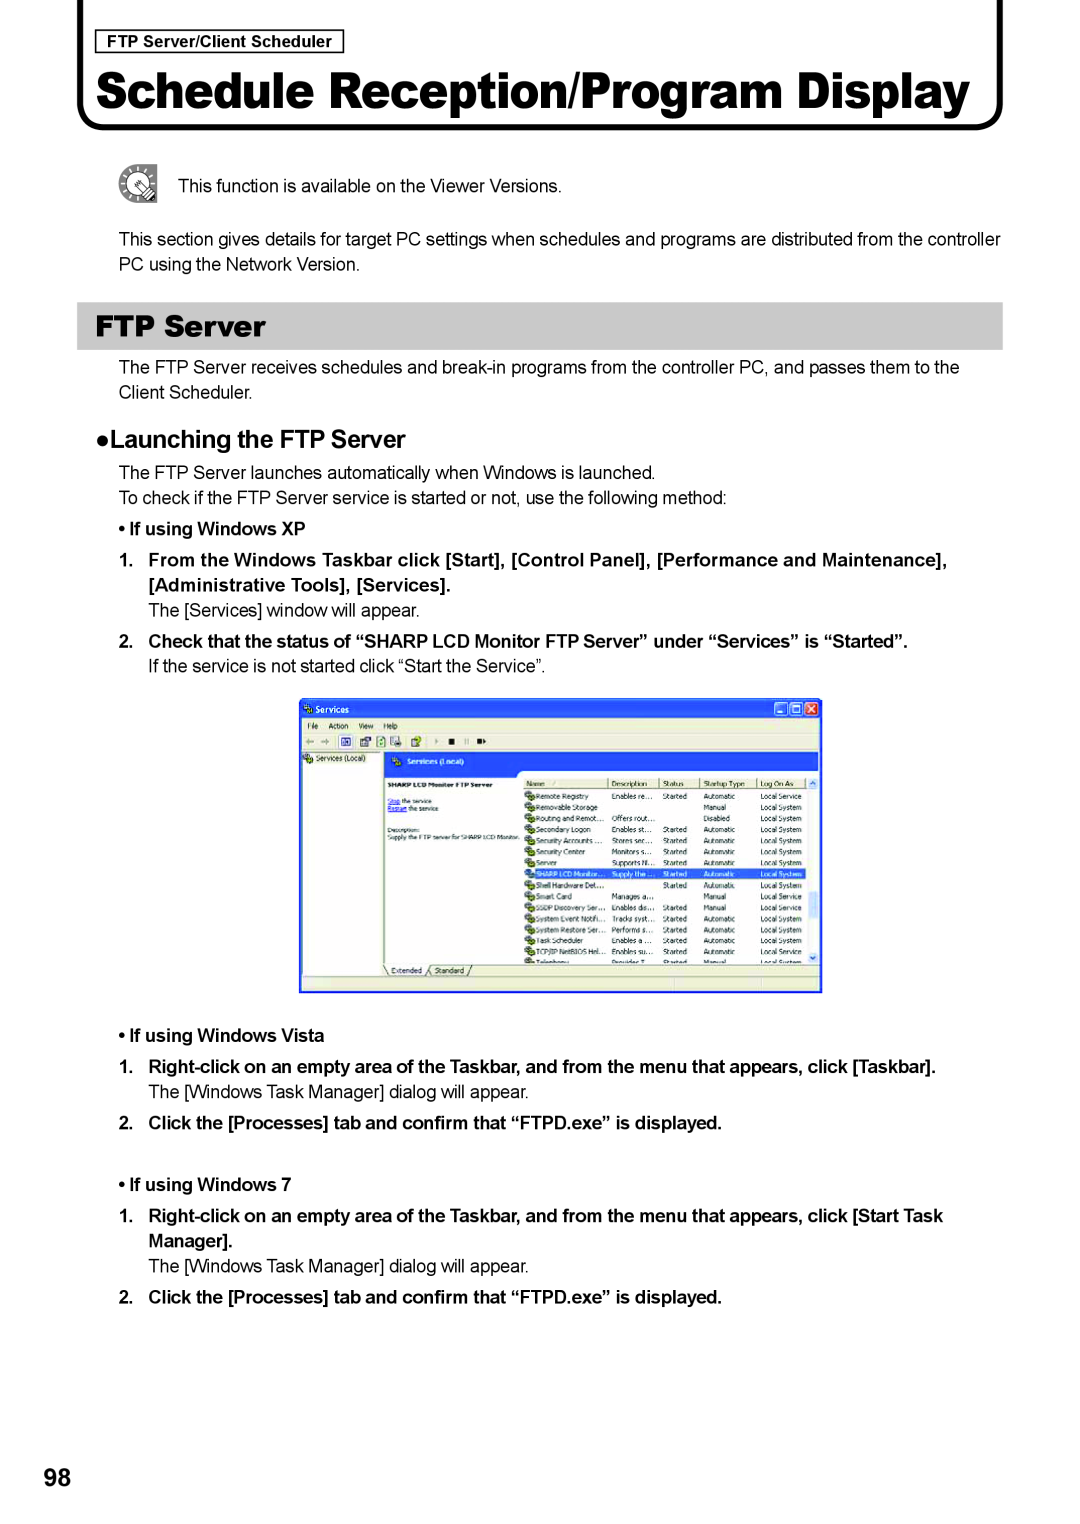 Sharp PNSV01 Launching the FTP Server, Click the Processes tab and confirm that “FTPD.exe” is displayed 